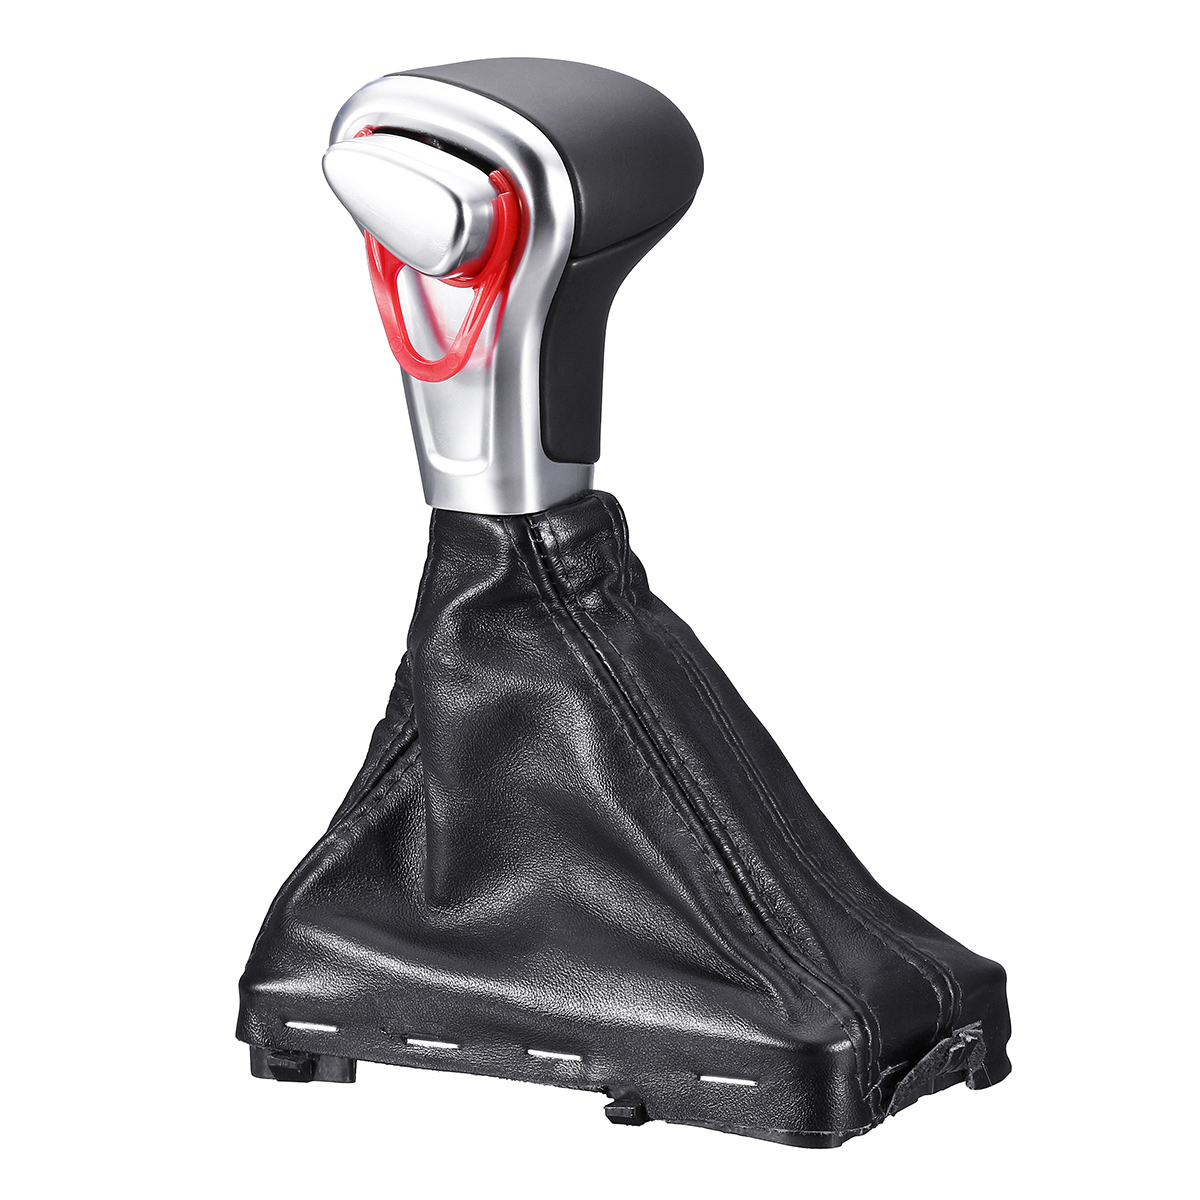 Gear Shift Knob with PU Leather Gaiter Boot Cover for Audi A4 A6 Q5 Q7 Left-Hand Drive